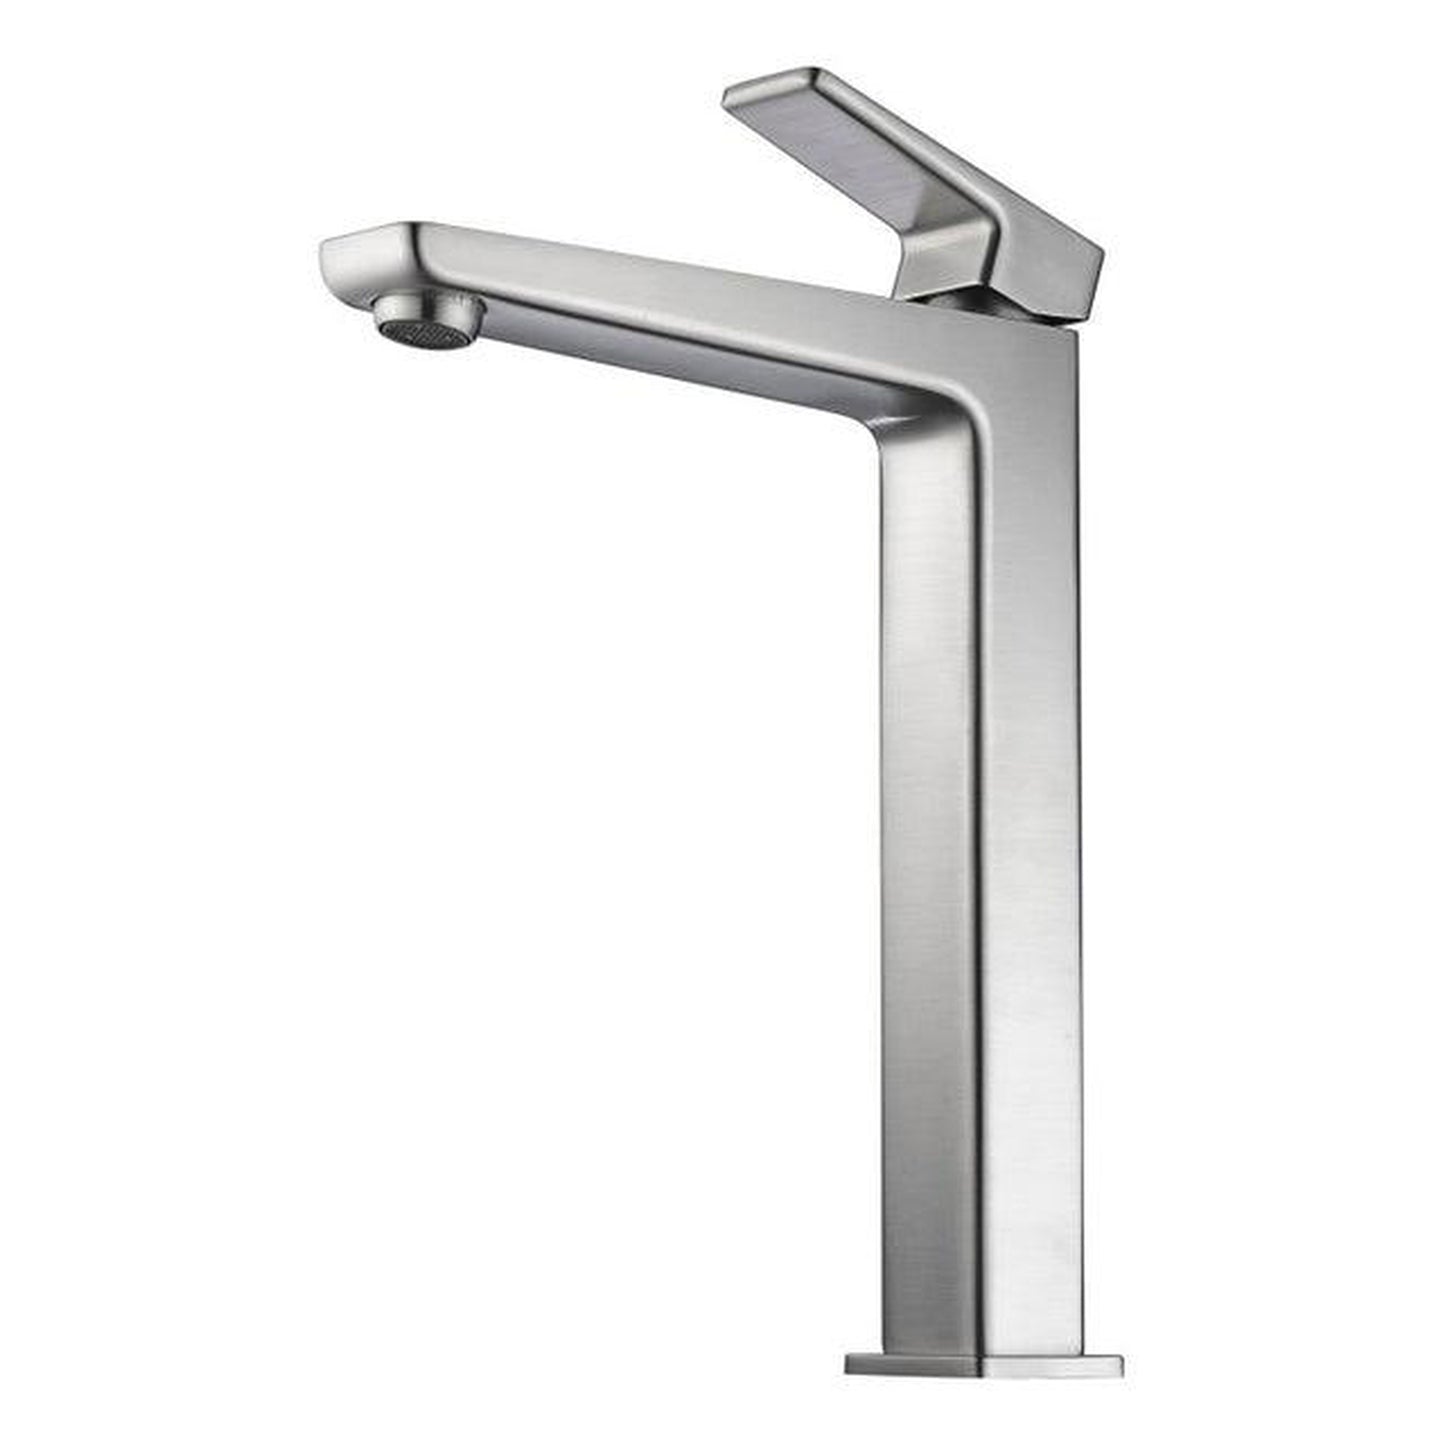 ANZZI Valor Series 9" Single Hole Brushed Nickel Bathroom Sink Faucet